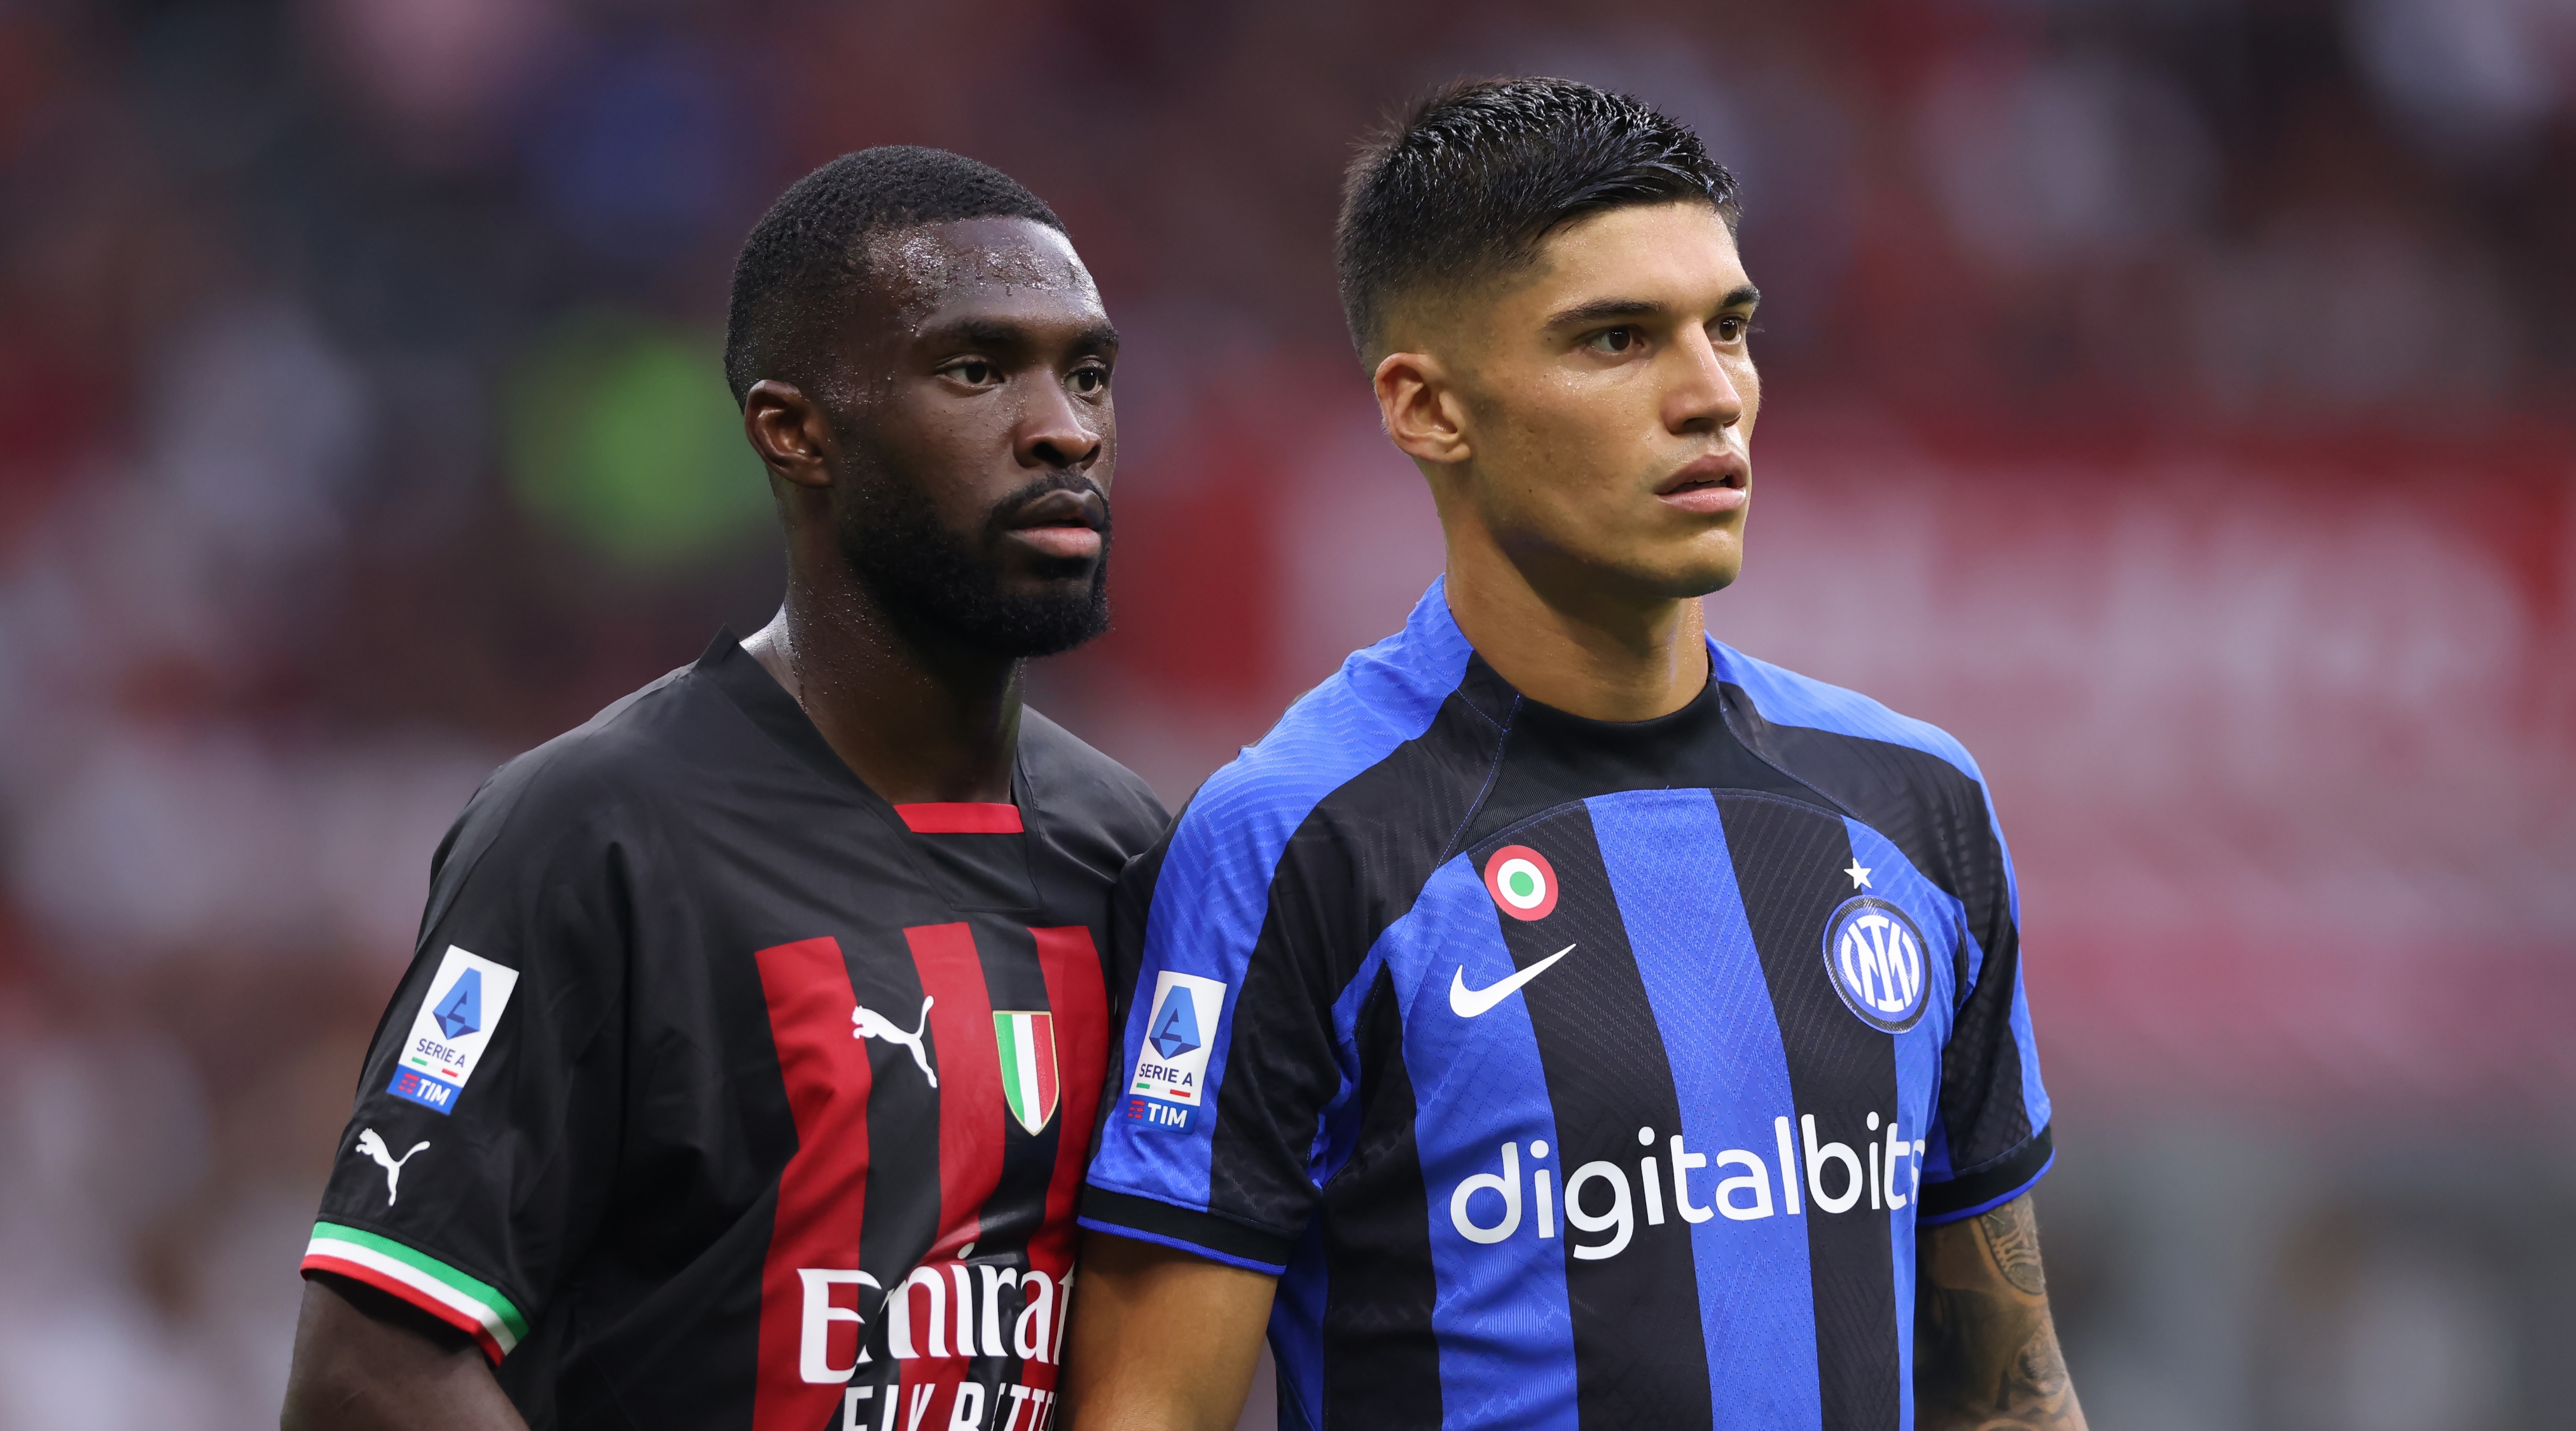 AC Milan Inter Milan live stream, match preview, team news and kick-off time for this Italian Super Cup match FourFourTwo